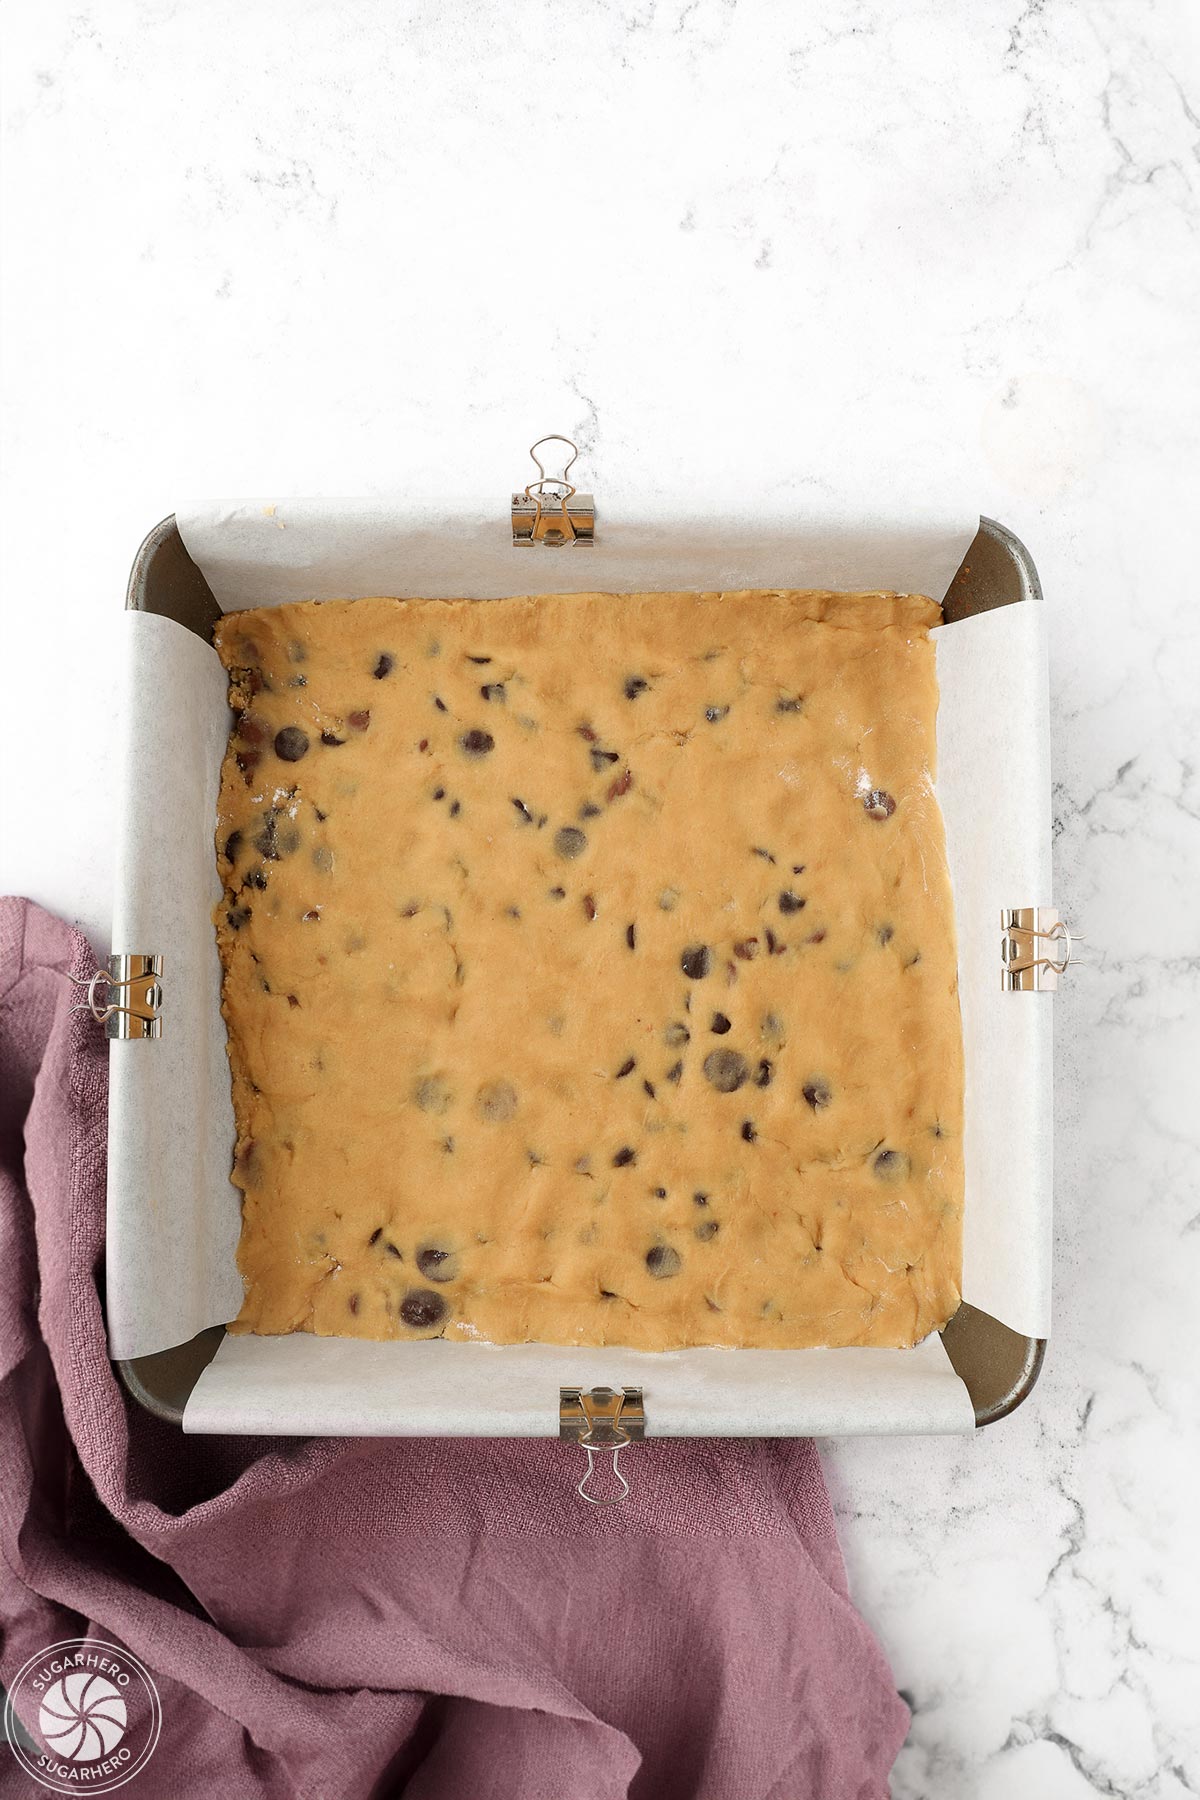 Chocolate chip cookie dough spread out in a layer on the bottom of a square baking pan.